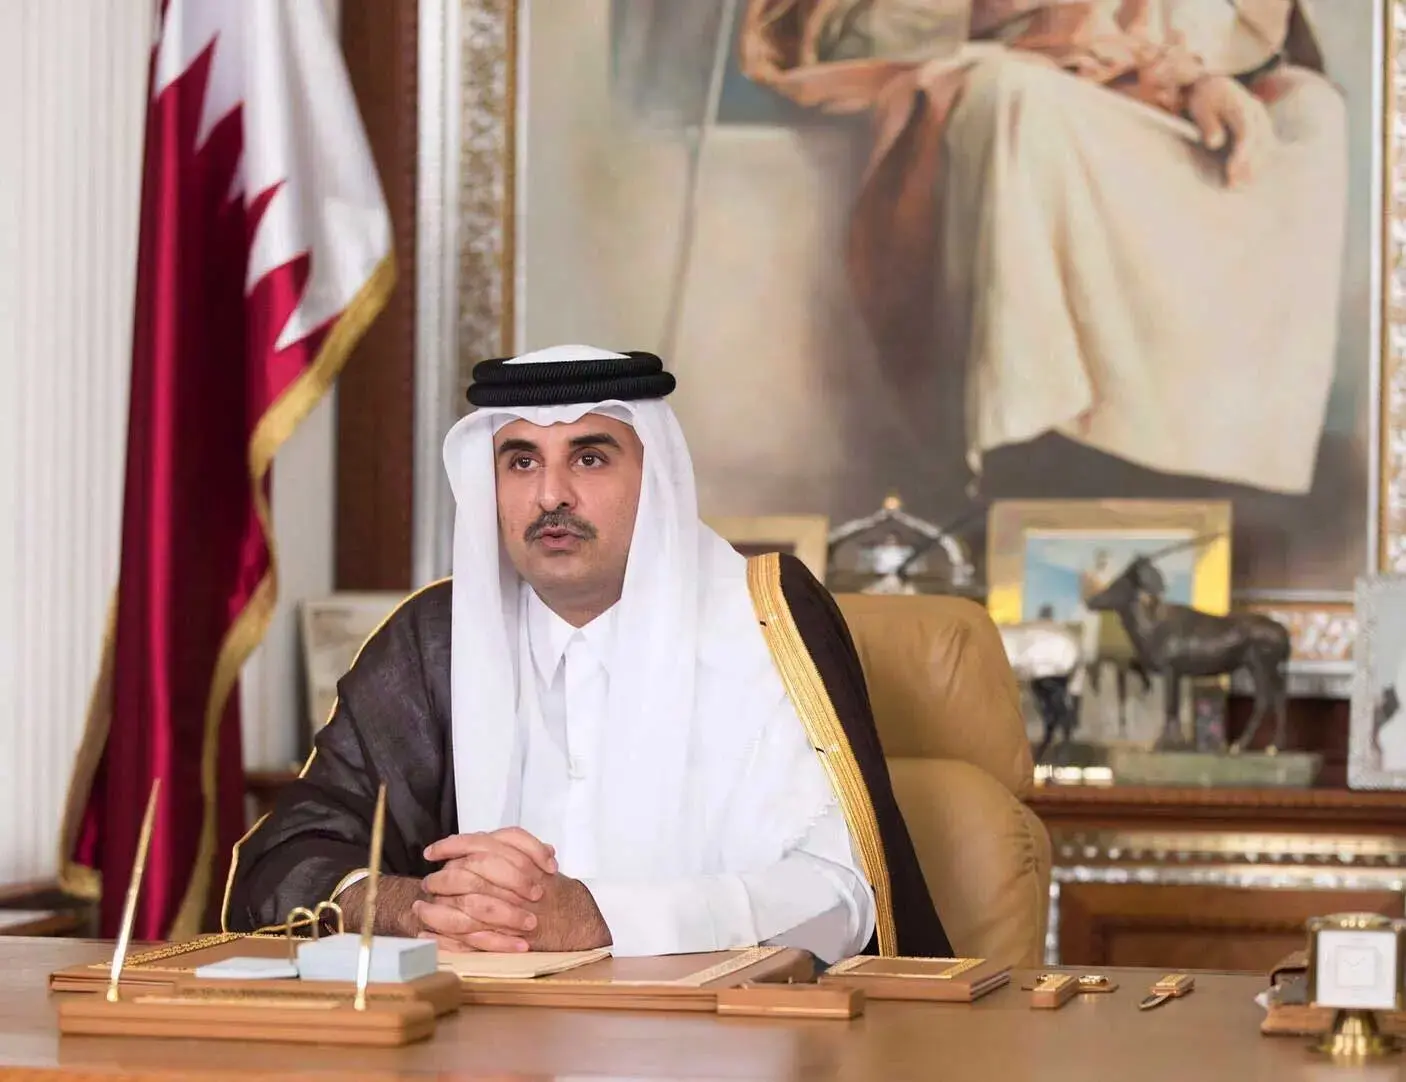 Extensive police deployment for security during Qatari Emir’s visit